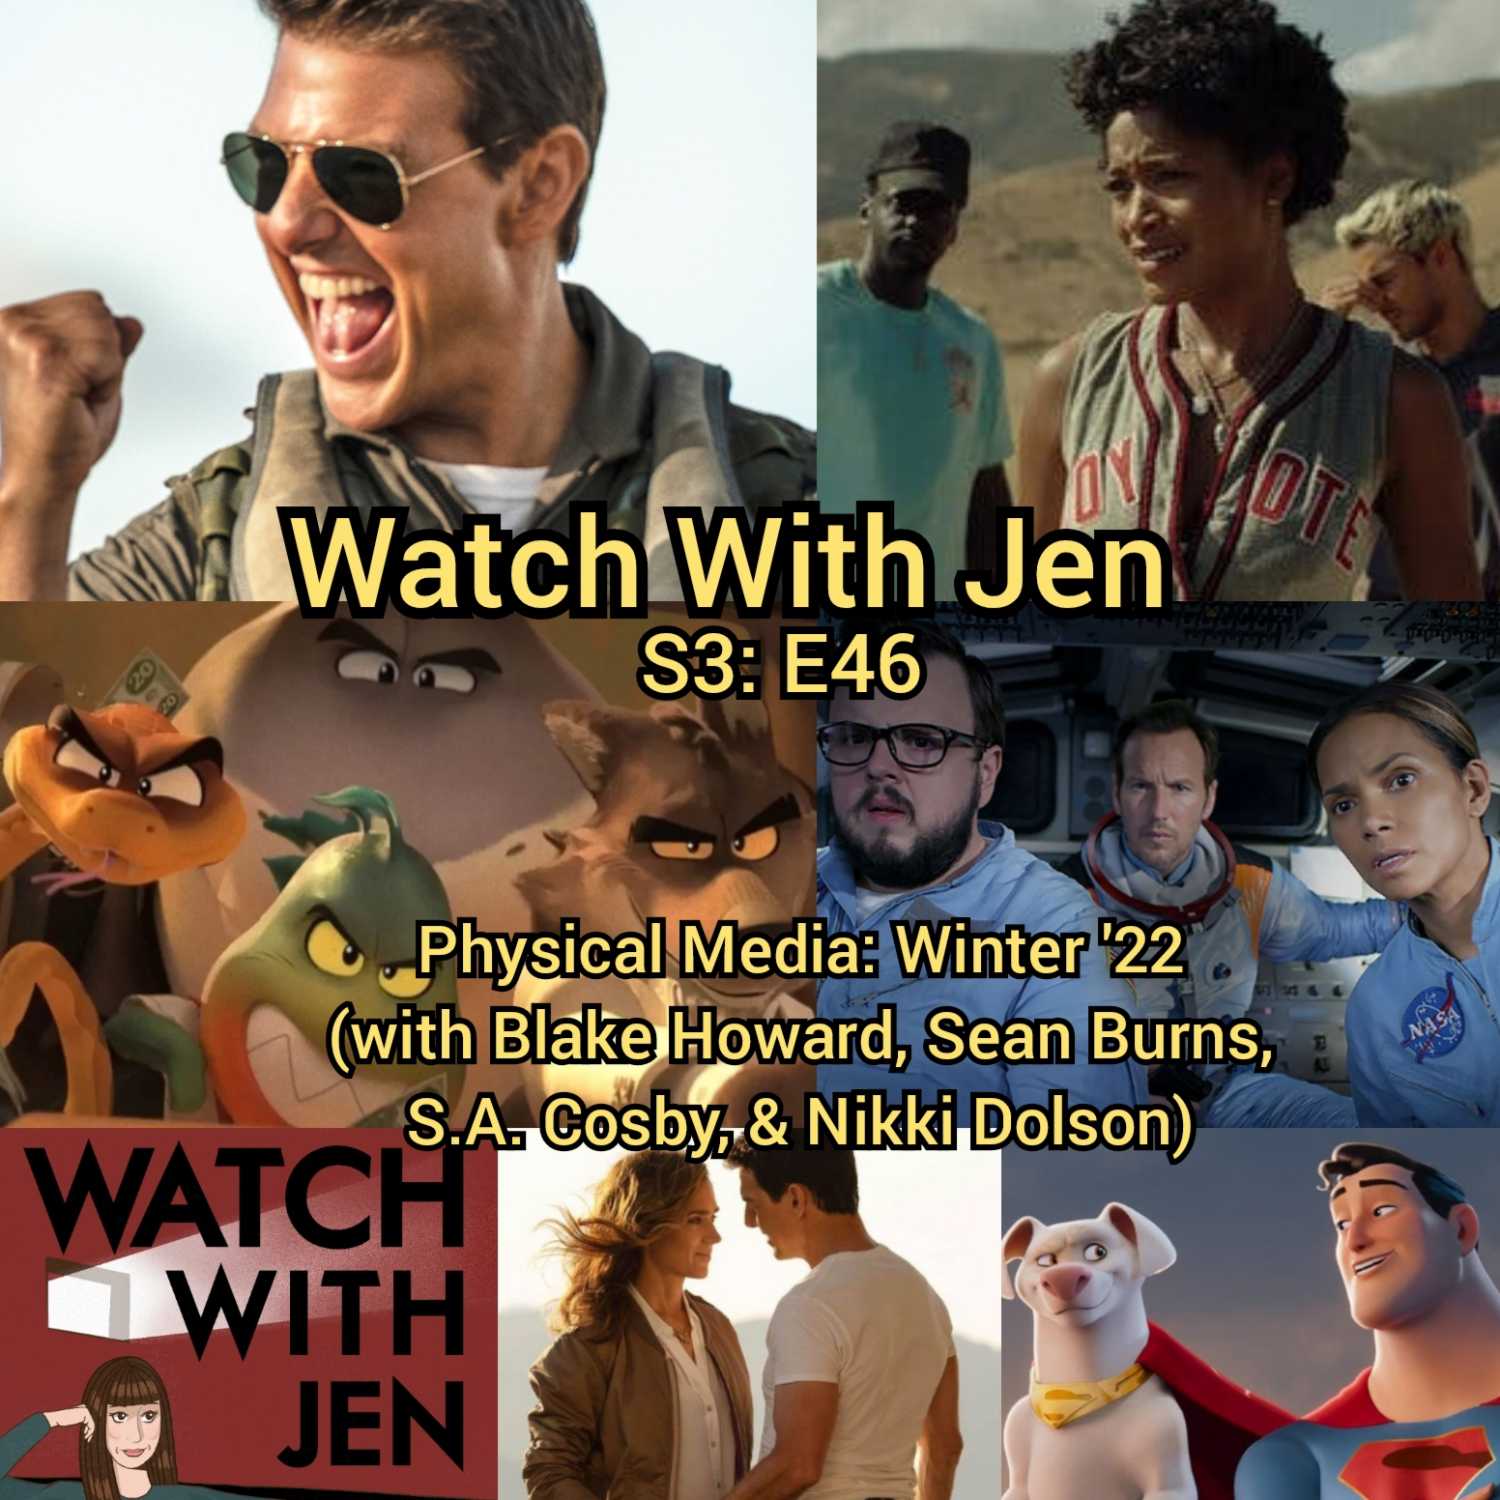 Watch With Jen - S3: E46 - Physical Media: Winter ’22 (with Blake Howard, Sean Burns, S.A. Cosby, & Nikki Dolson)